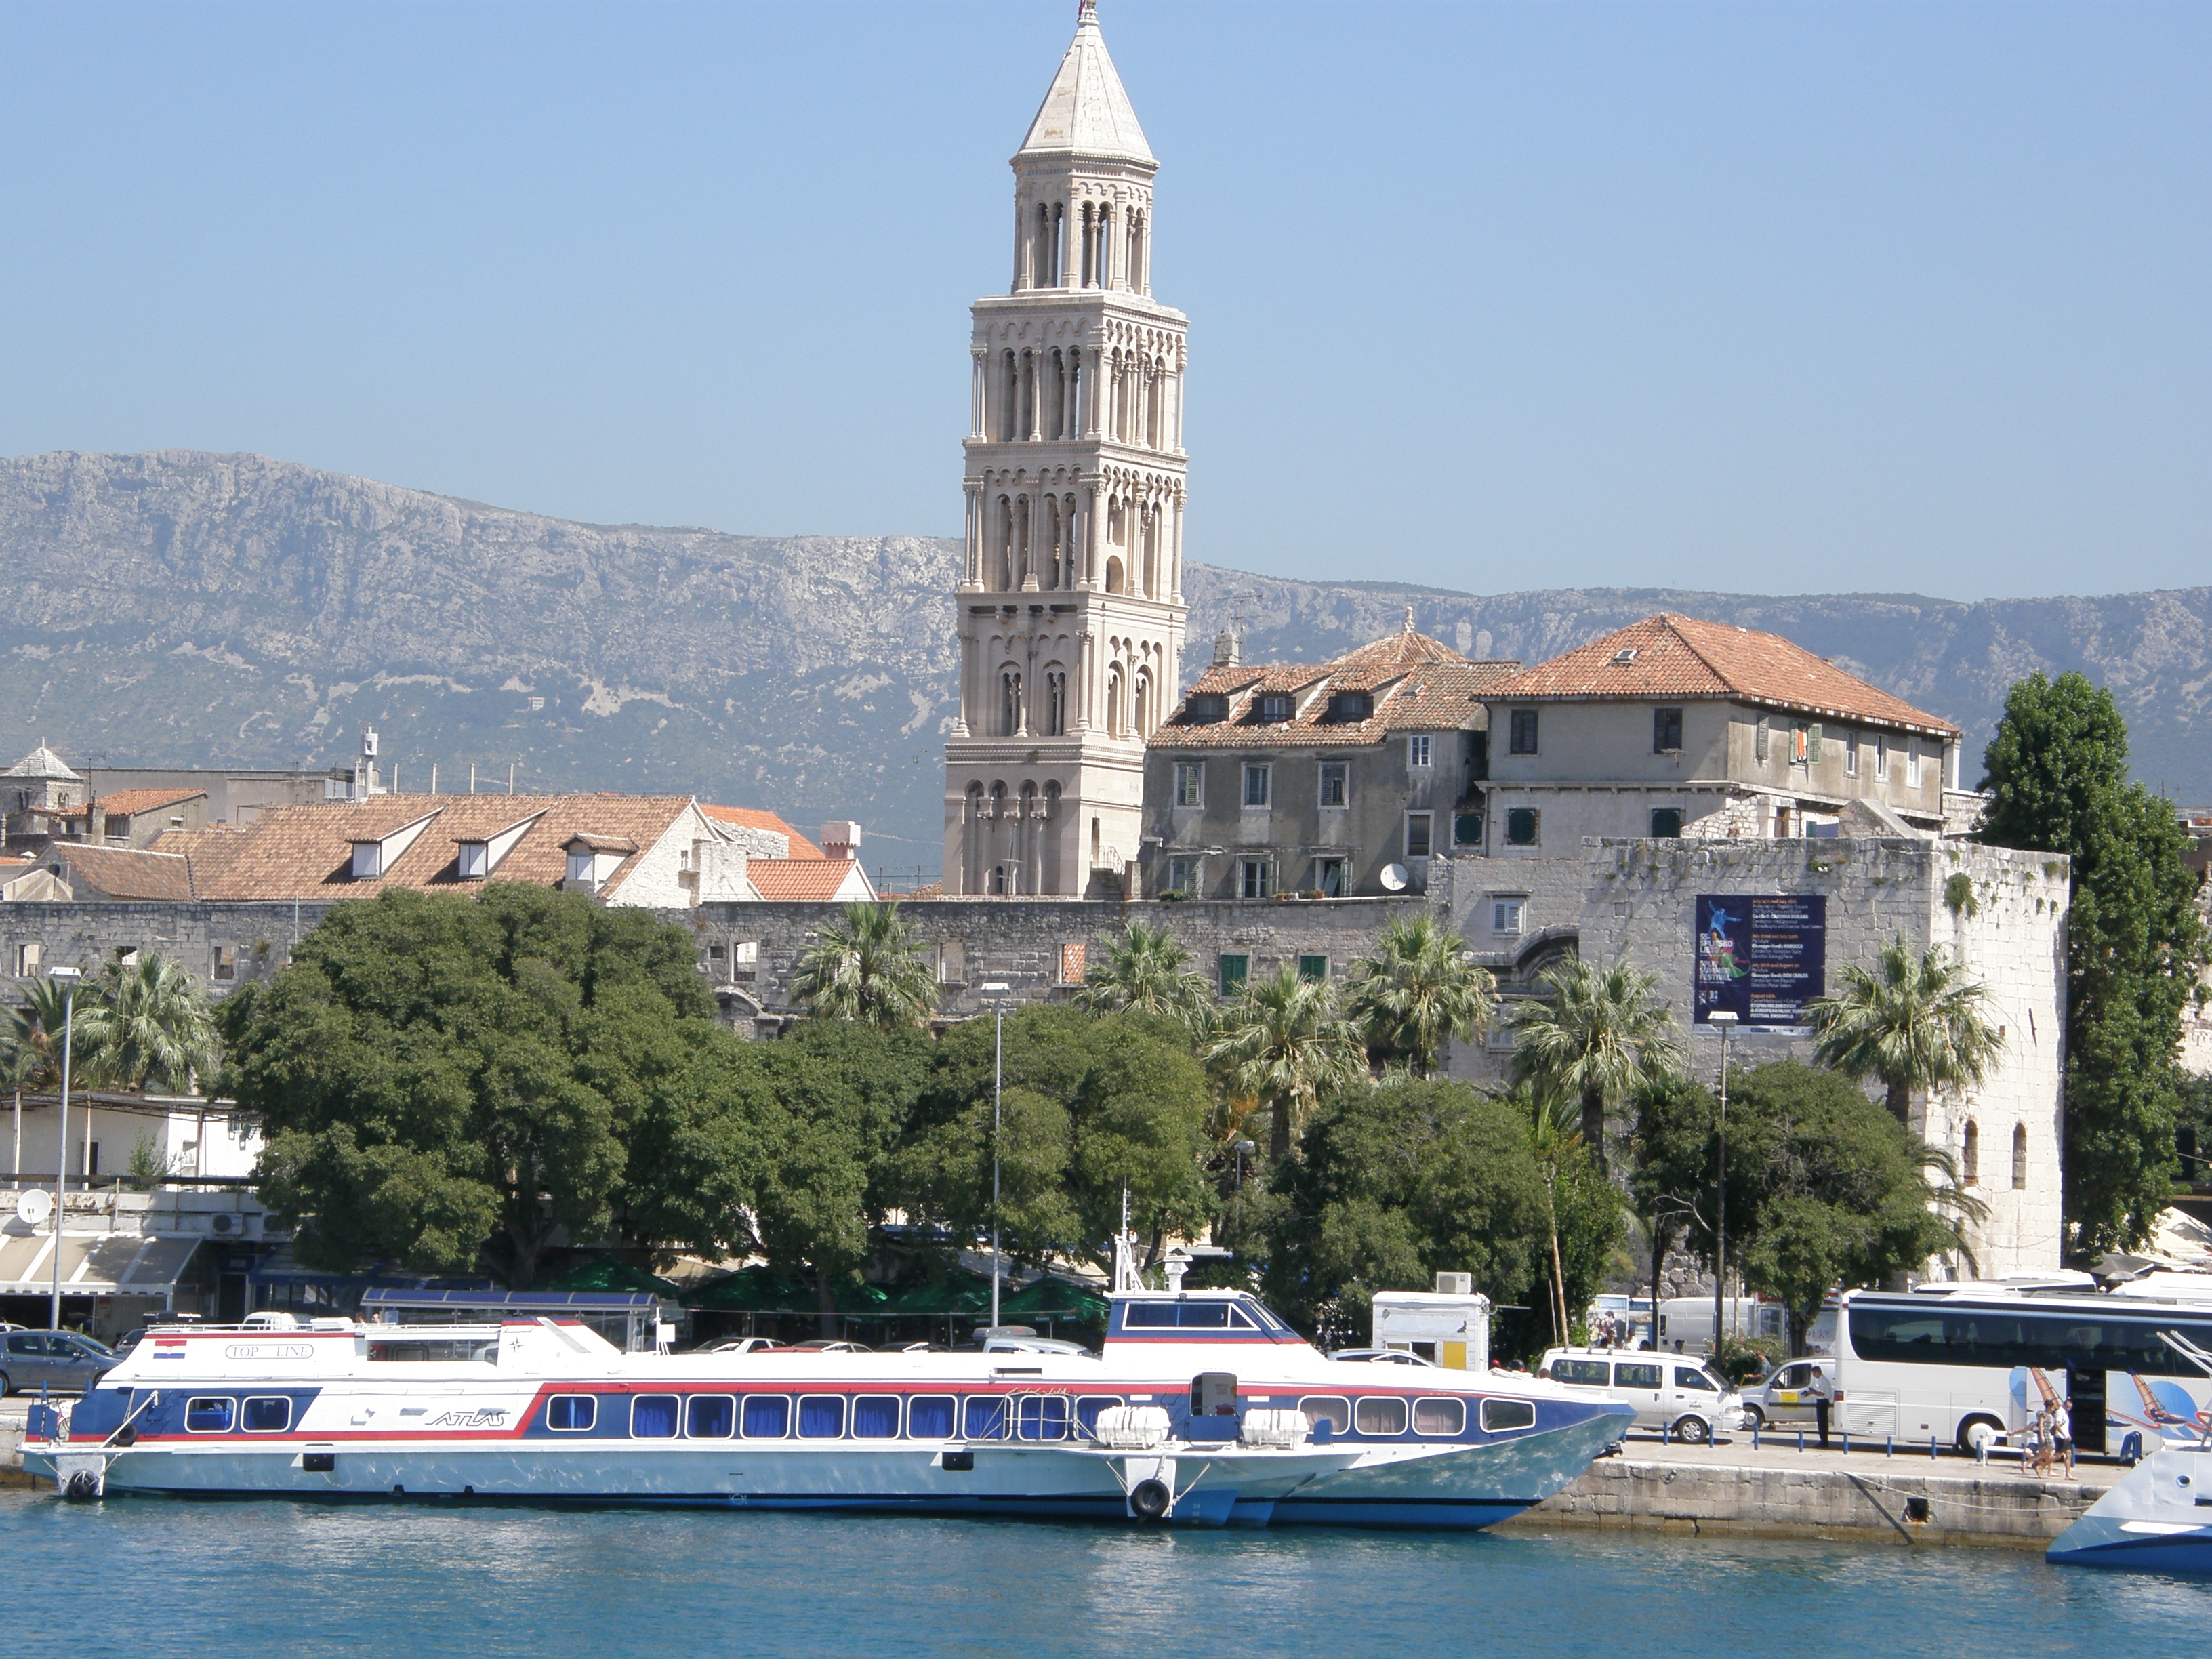 Hydrofoil ship in the port of Split and the bell tower of the Cathedral St. Duje in background, also Diocletian's palace, 2009.